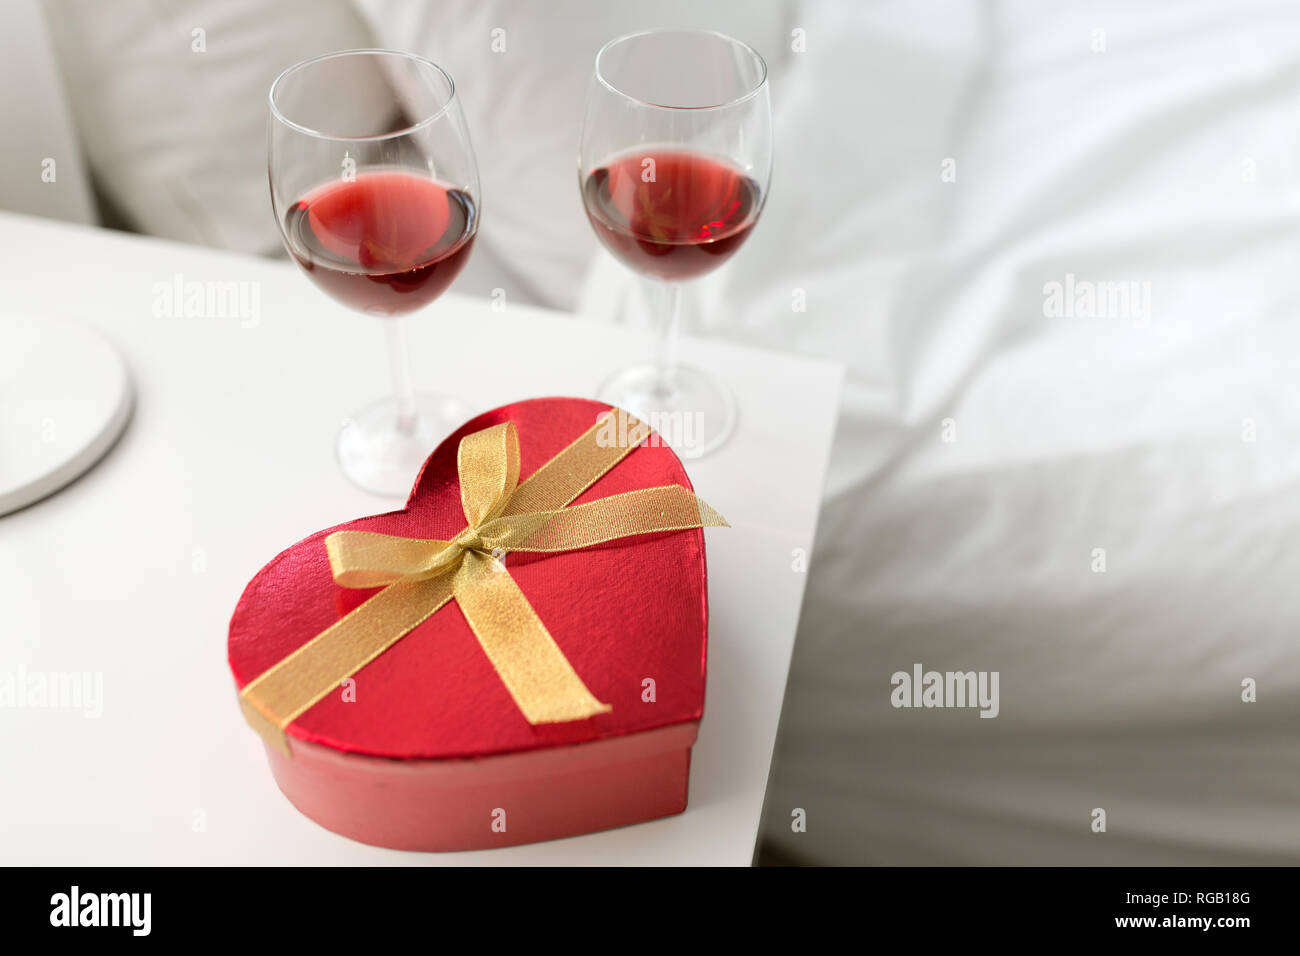 https://c8.alamy.com/comp/RGB18G/gift-and-two-glasses-of-wine-in-bedroom-at-home-RGB18G.jpg